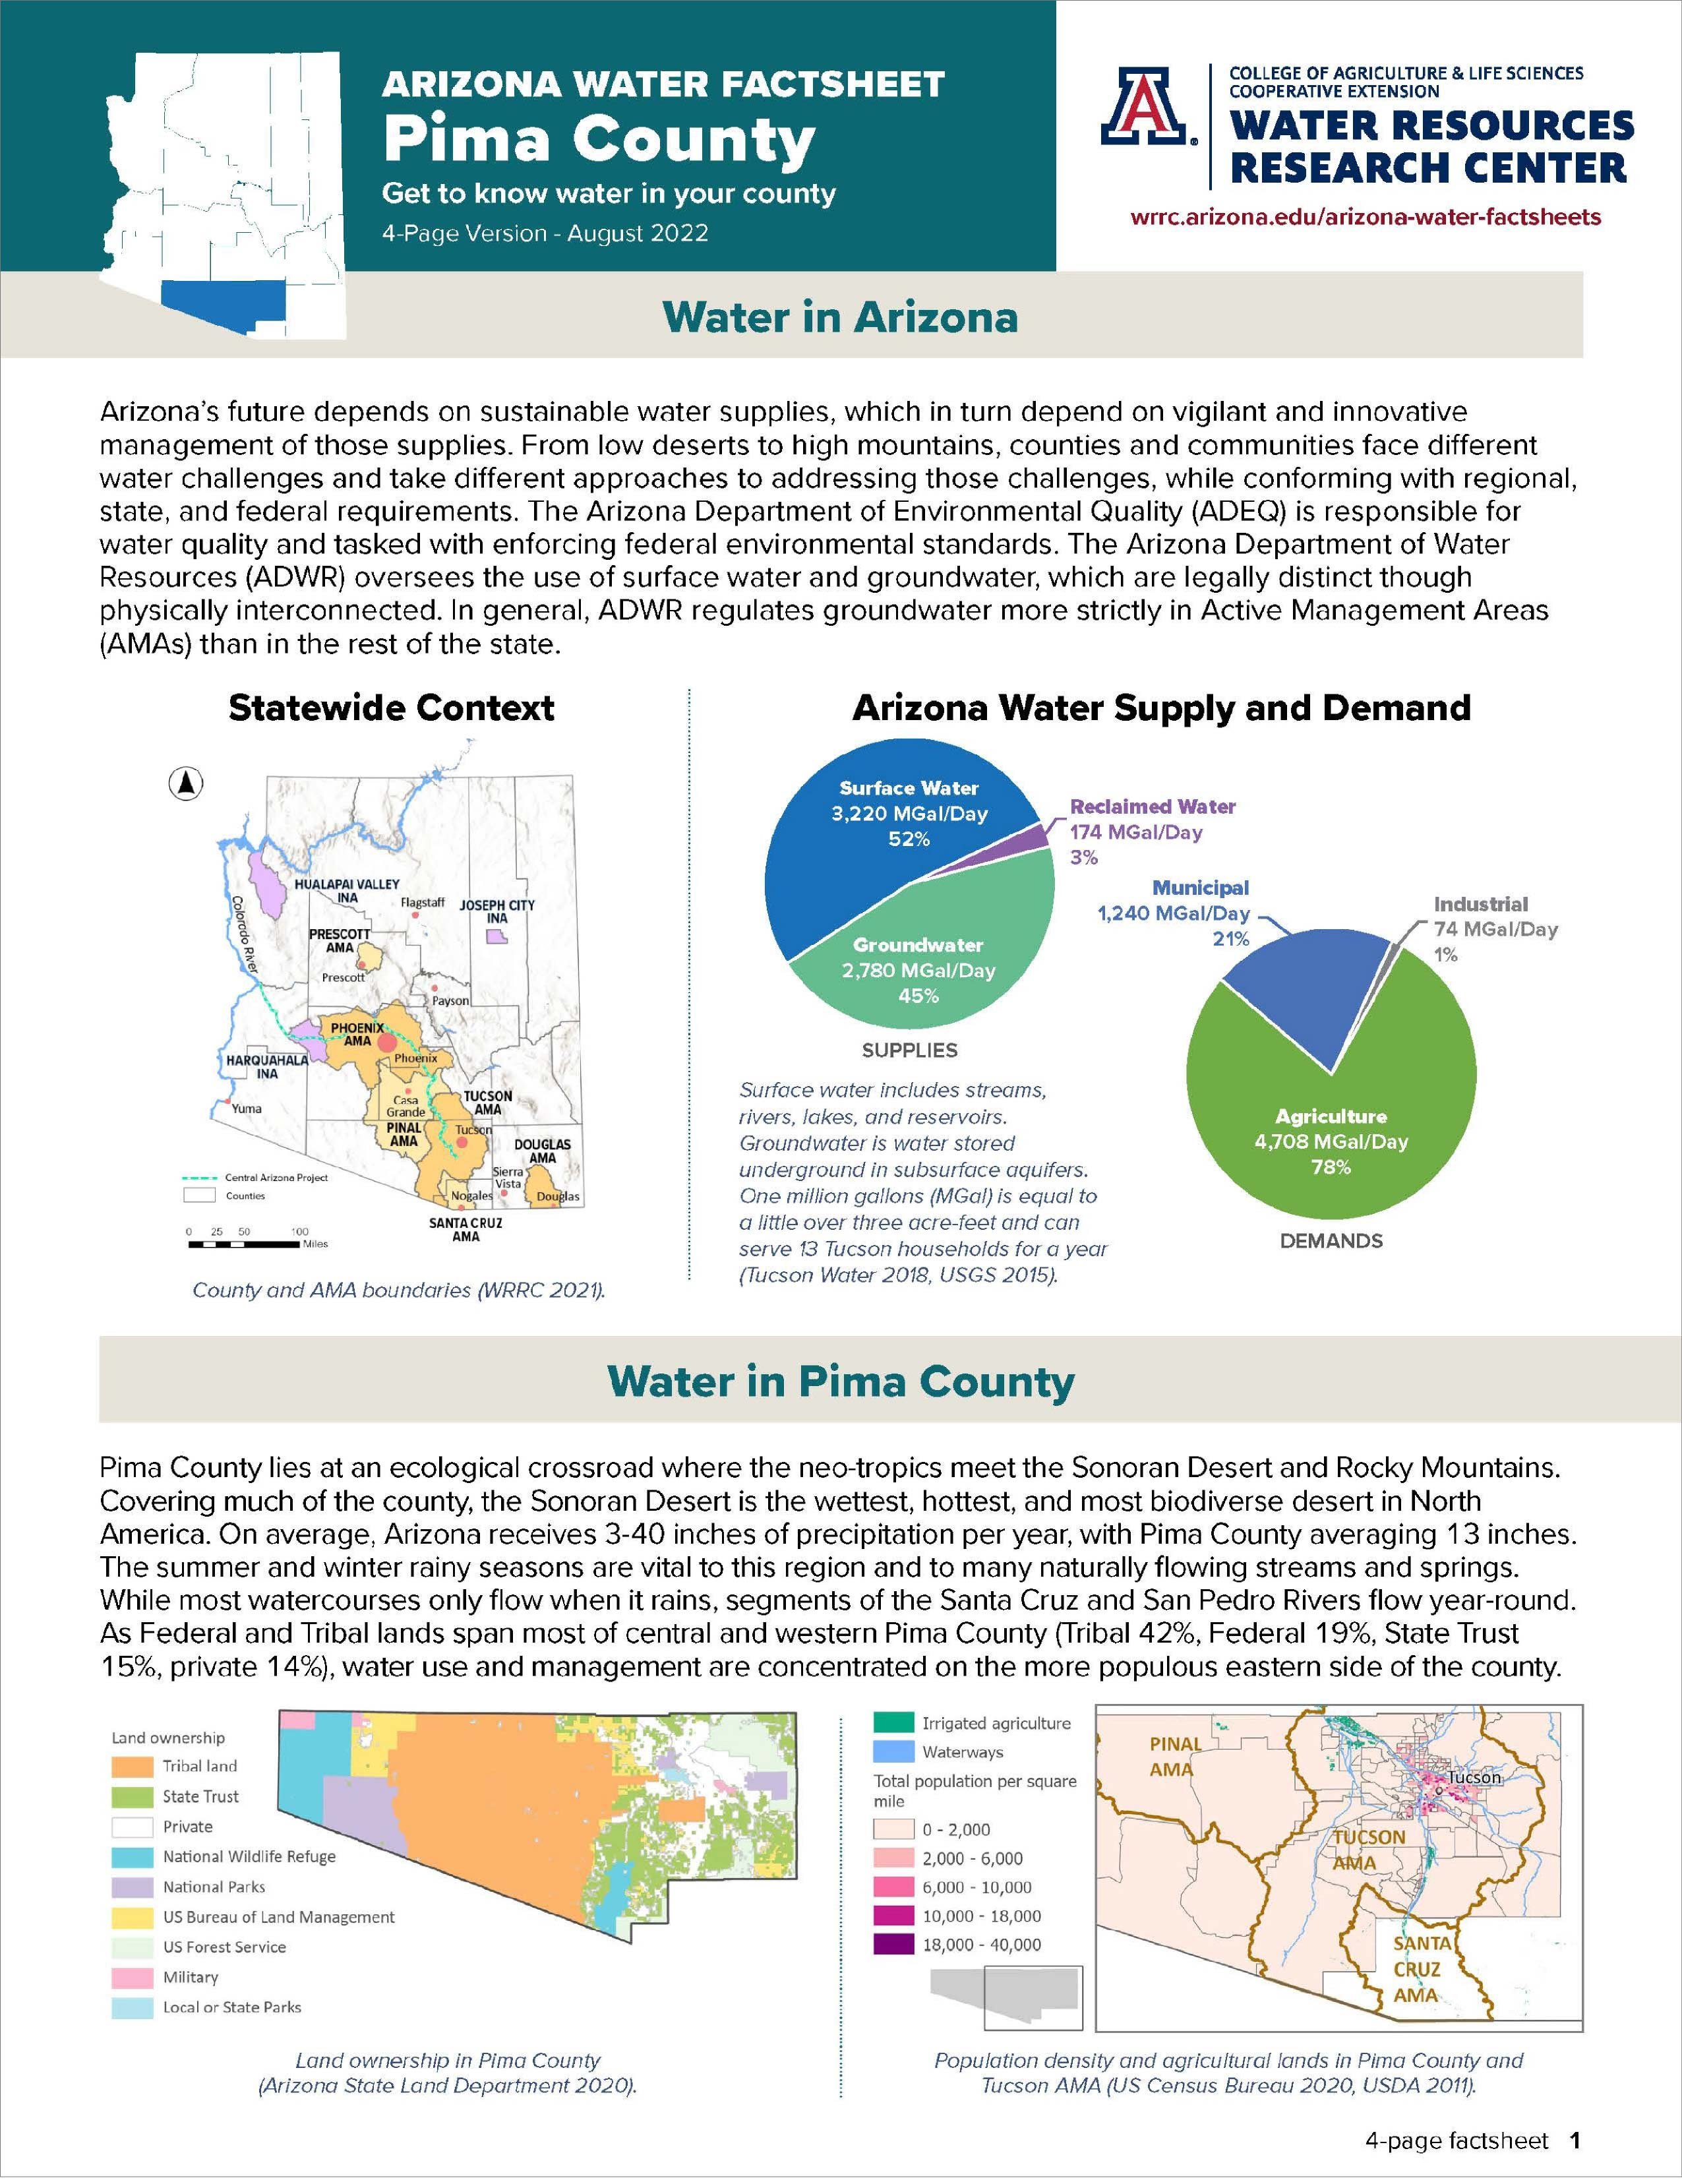 First page of Pima County Water Factsheet